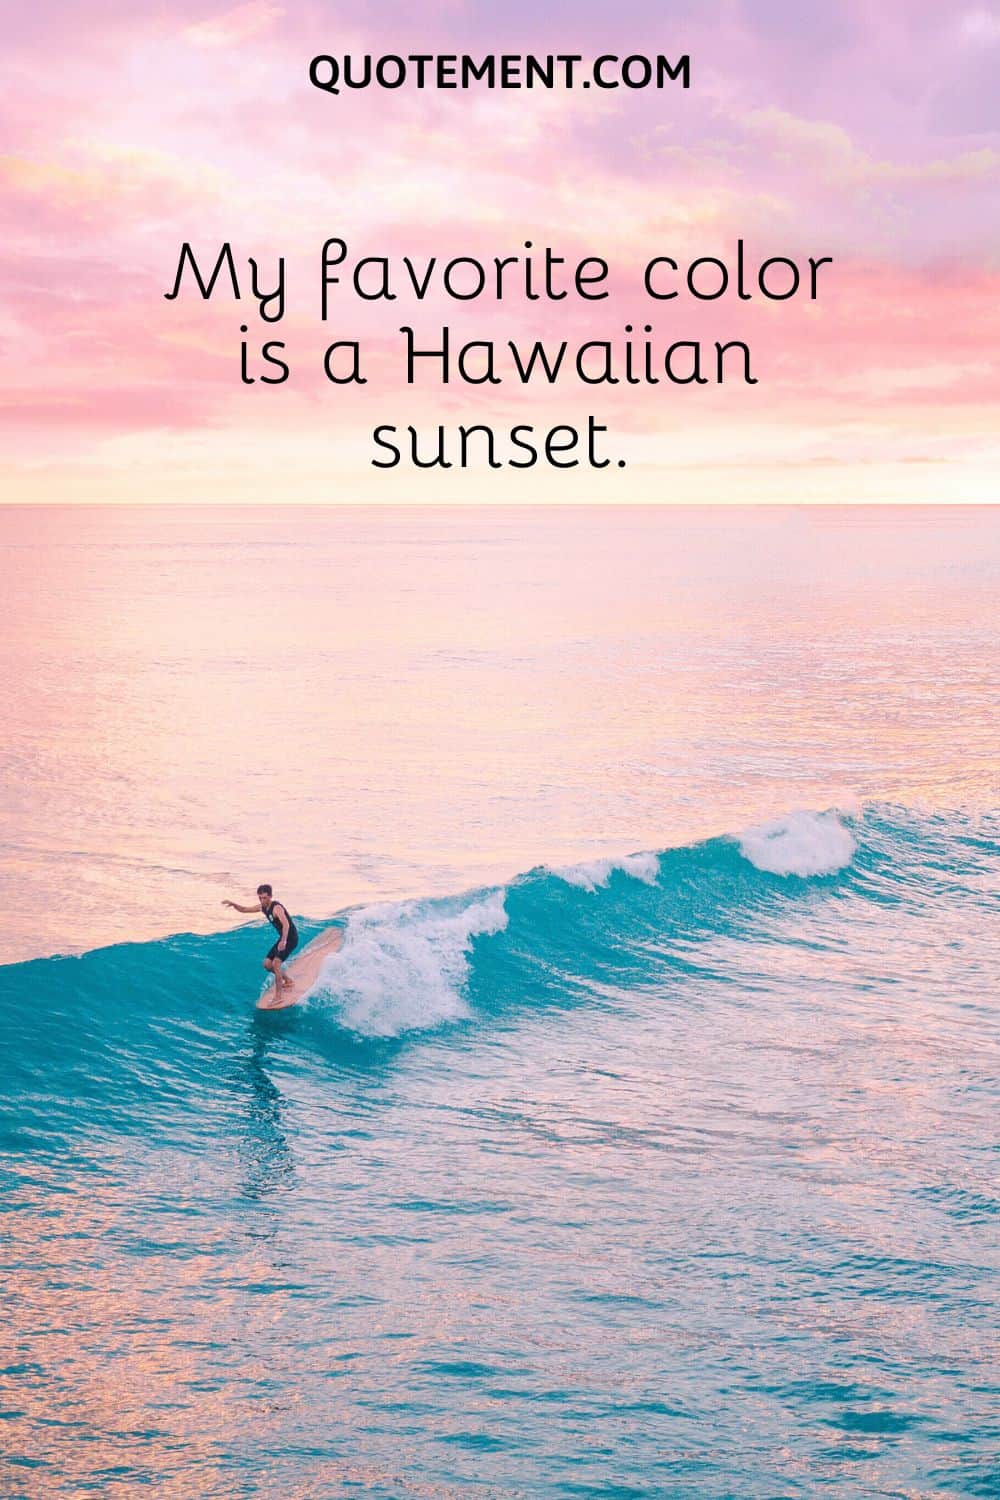 My favorite color is a Hawaiian sunset.